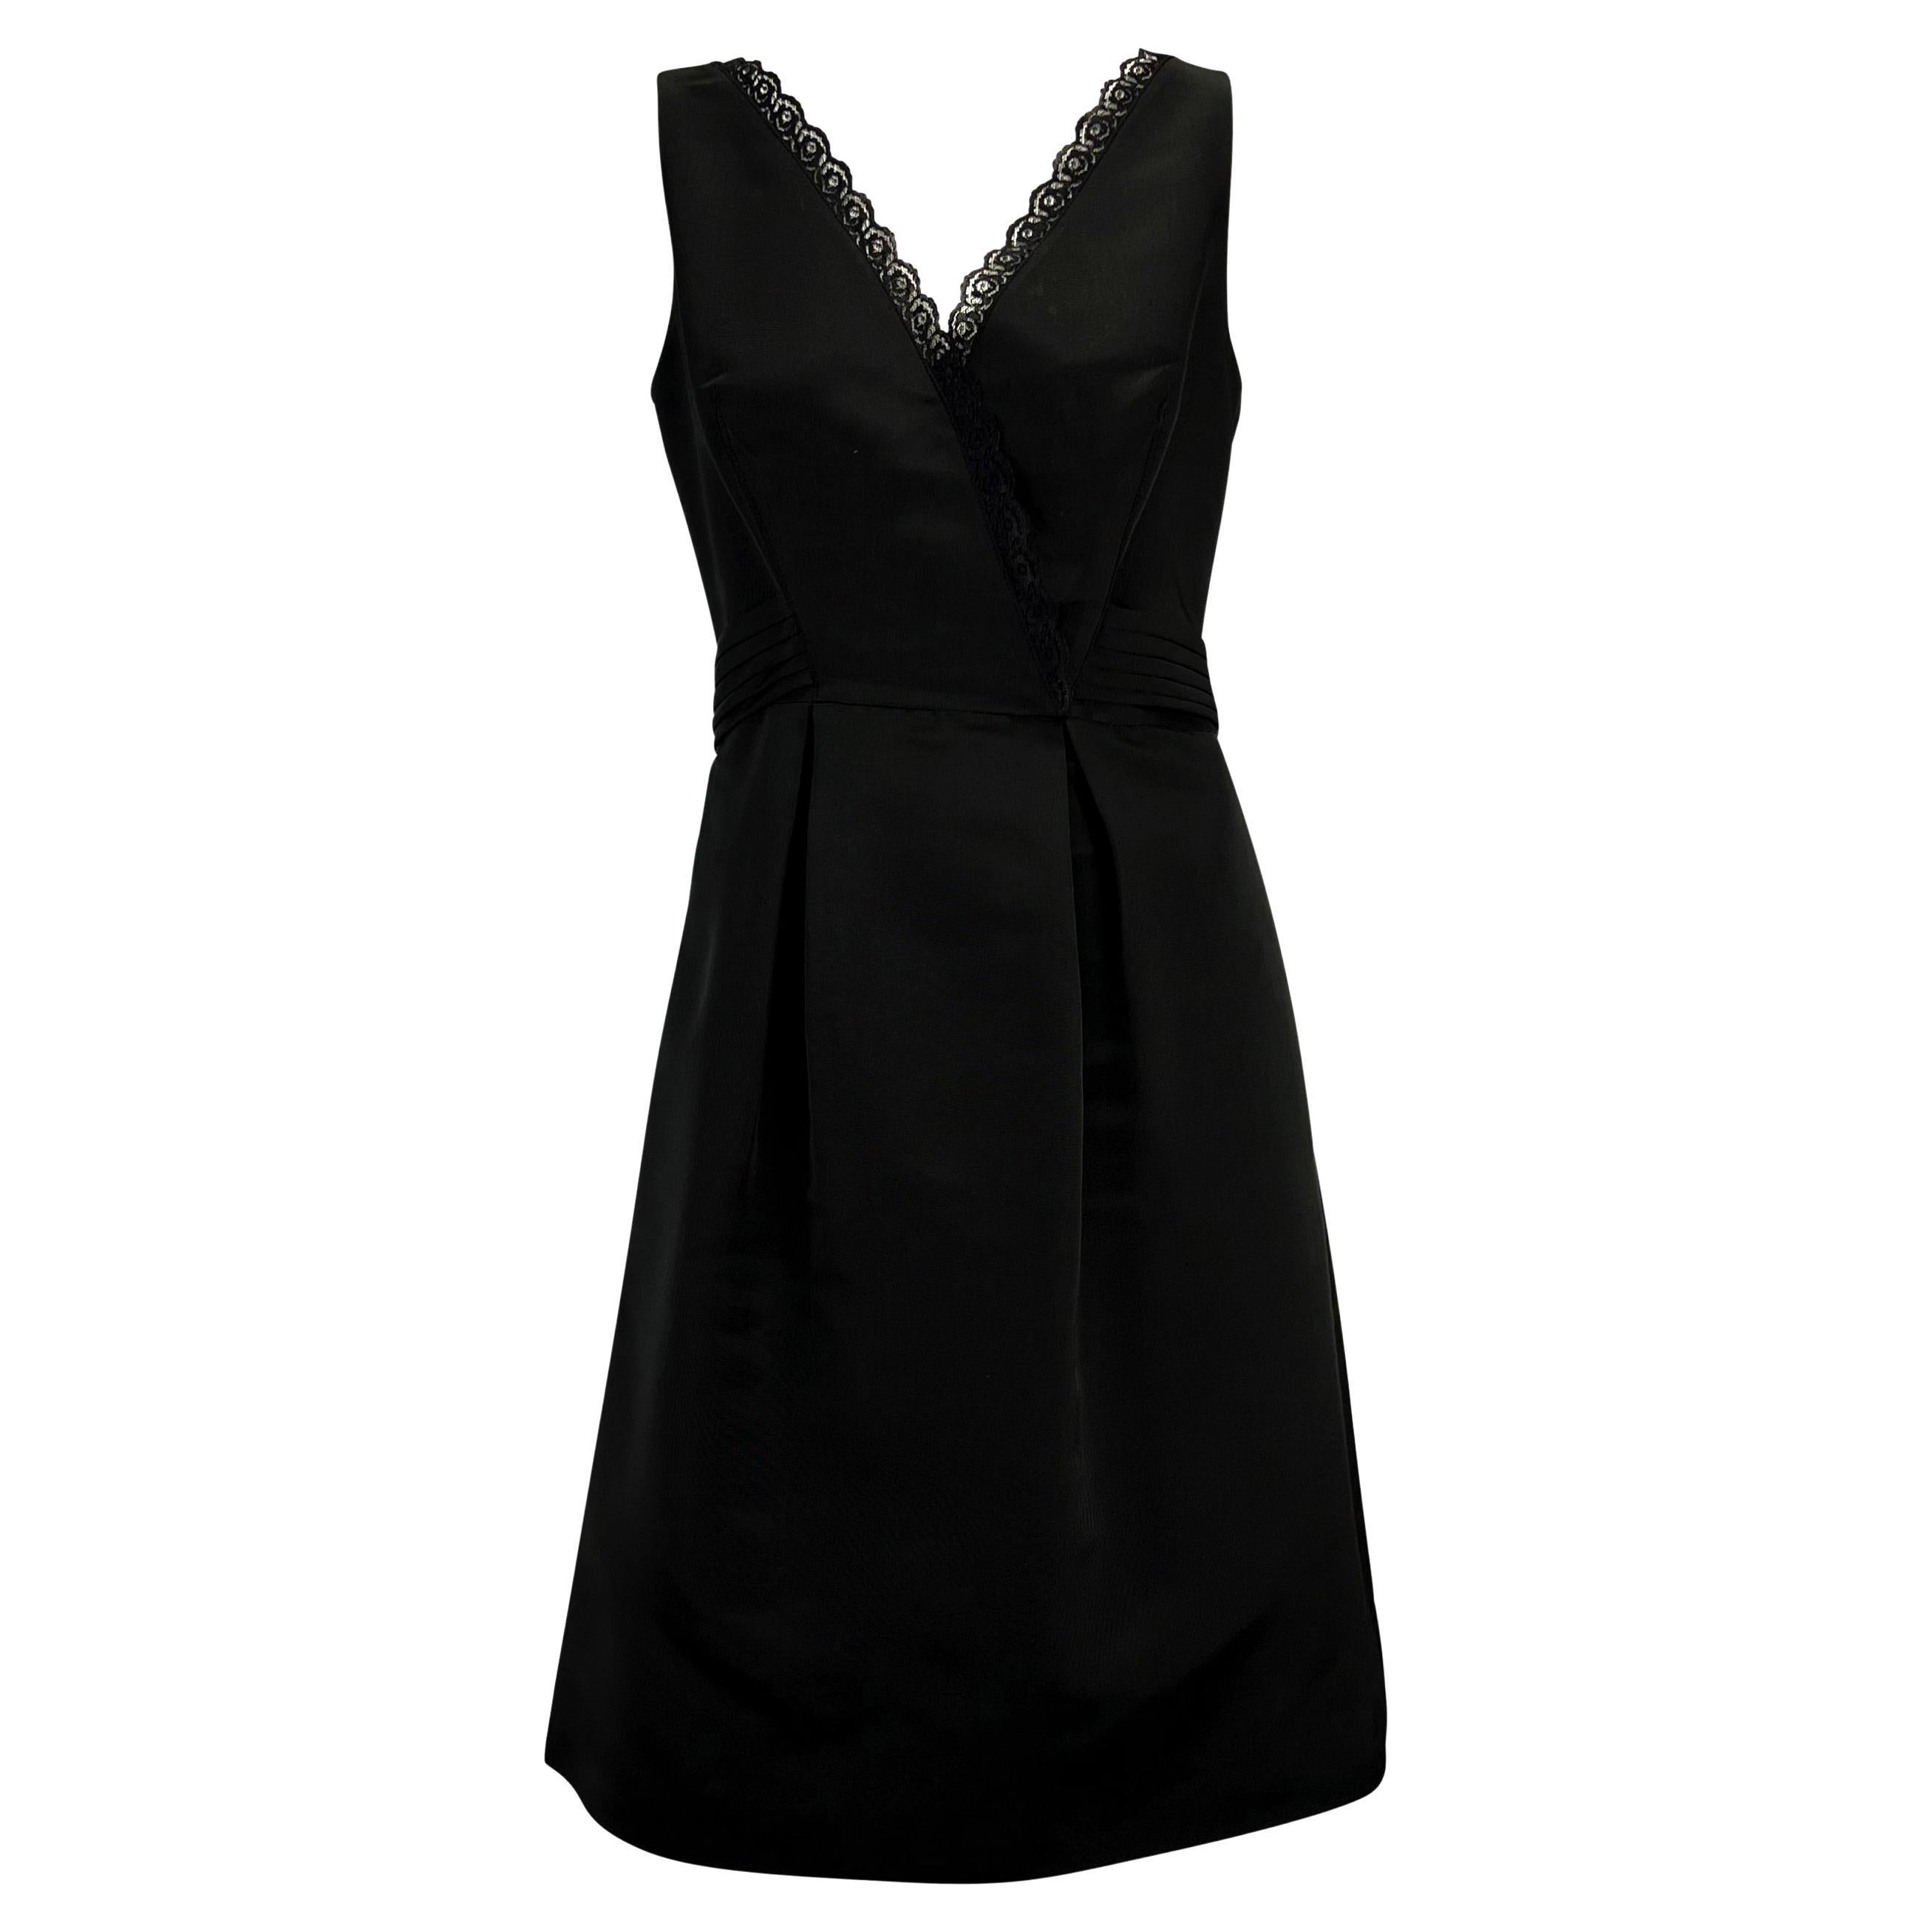 1990s Bill Blass Couture Black Bow Sleeveless Cocktail Dress For Sale 2